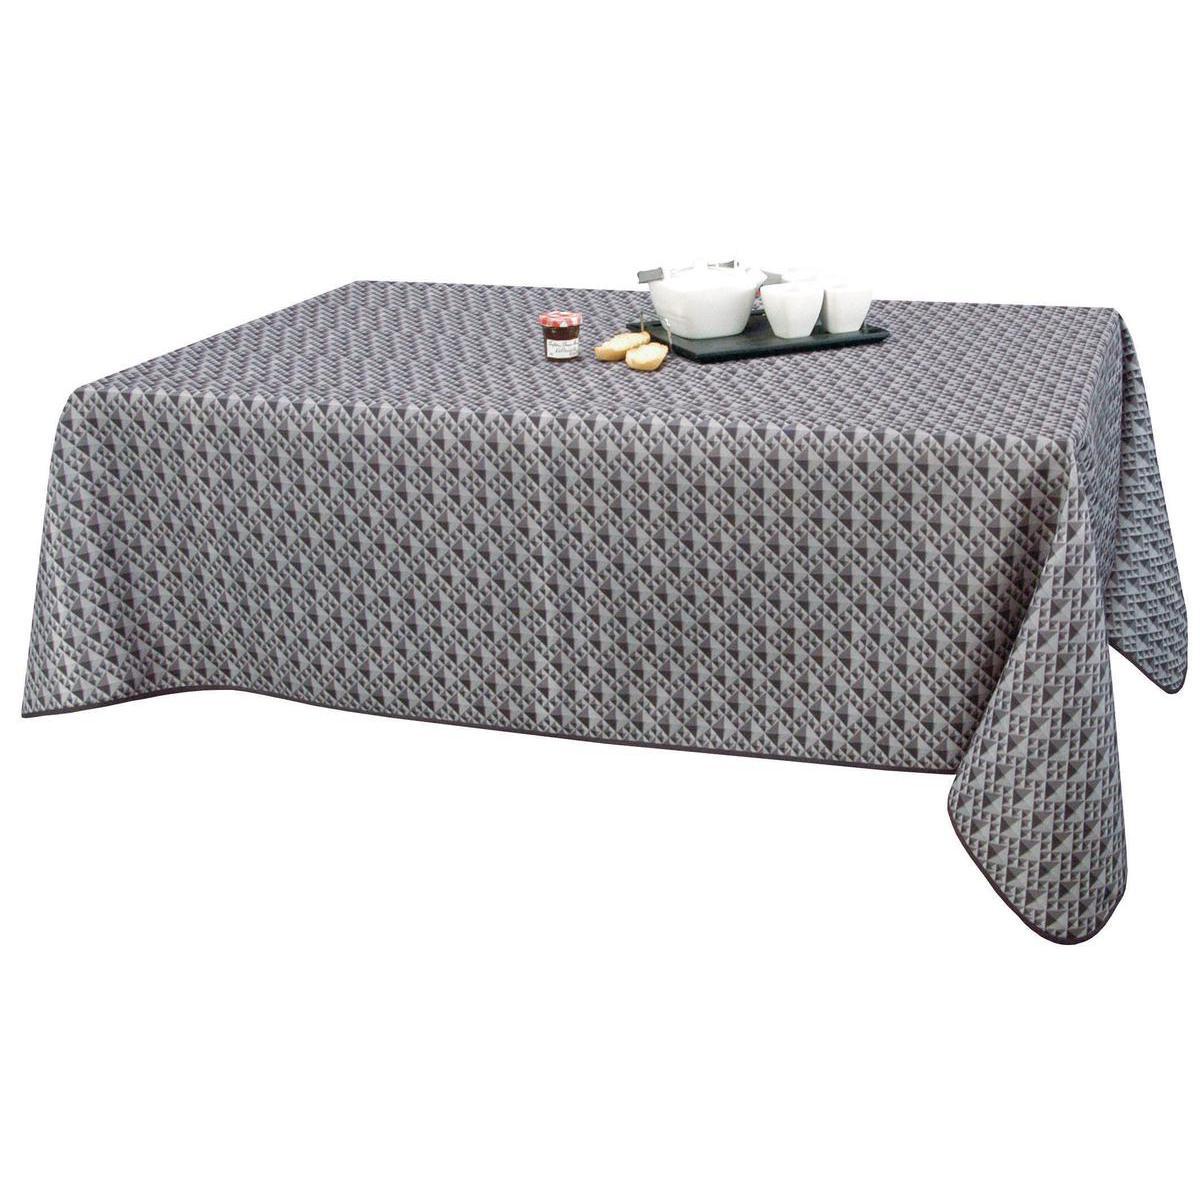 Nappe rectangulaire - Polyester -145 x 300 cm - Gris